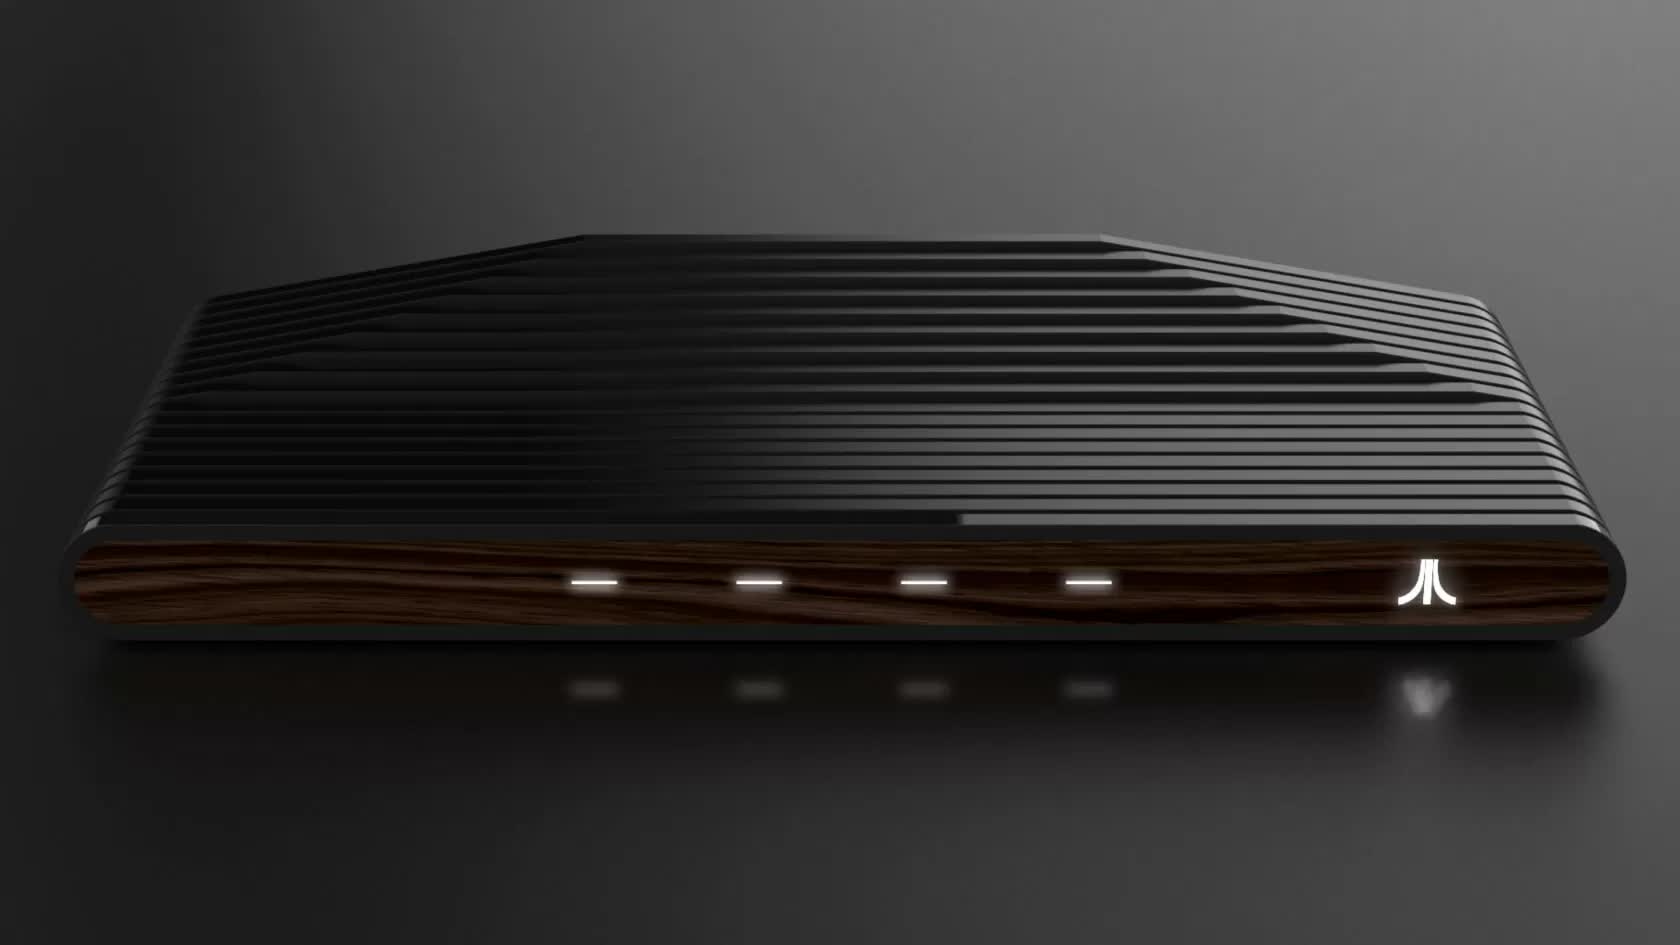 Atari says first VCS backer units are on the way